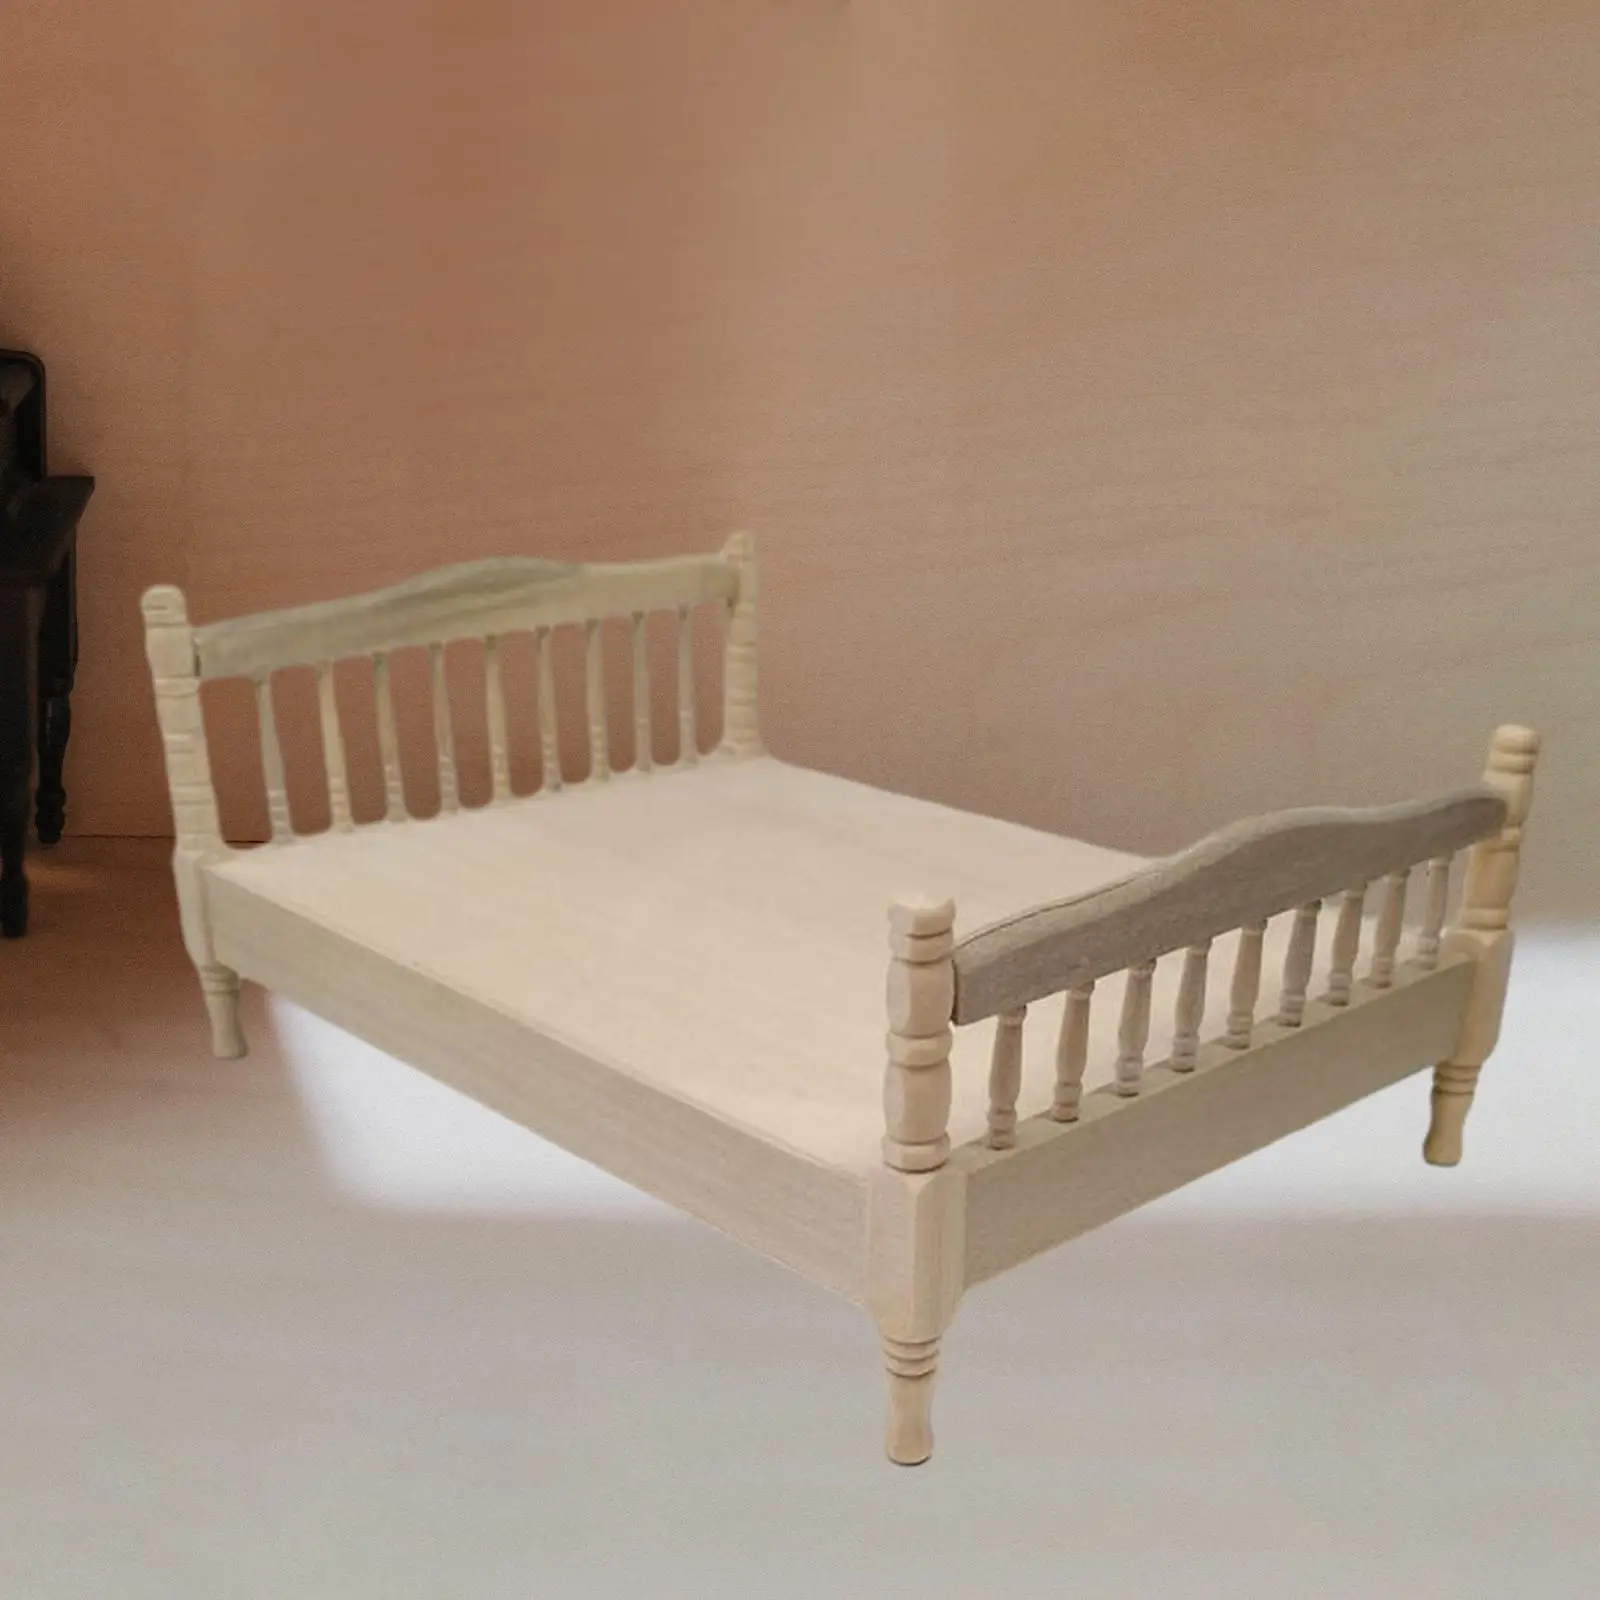 1/12 Dollhouse Bed Miniature Bedroom Furniture for DIY Scenery Architectural